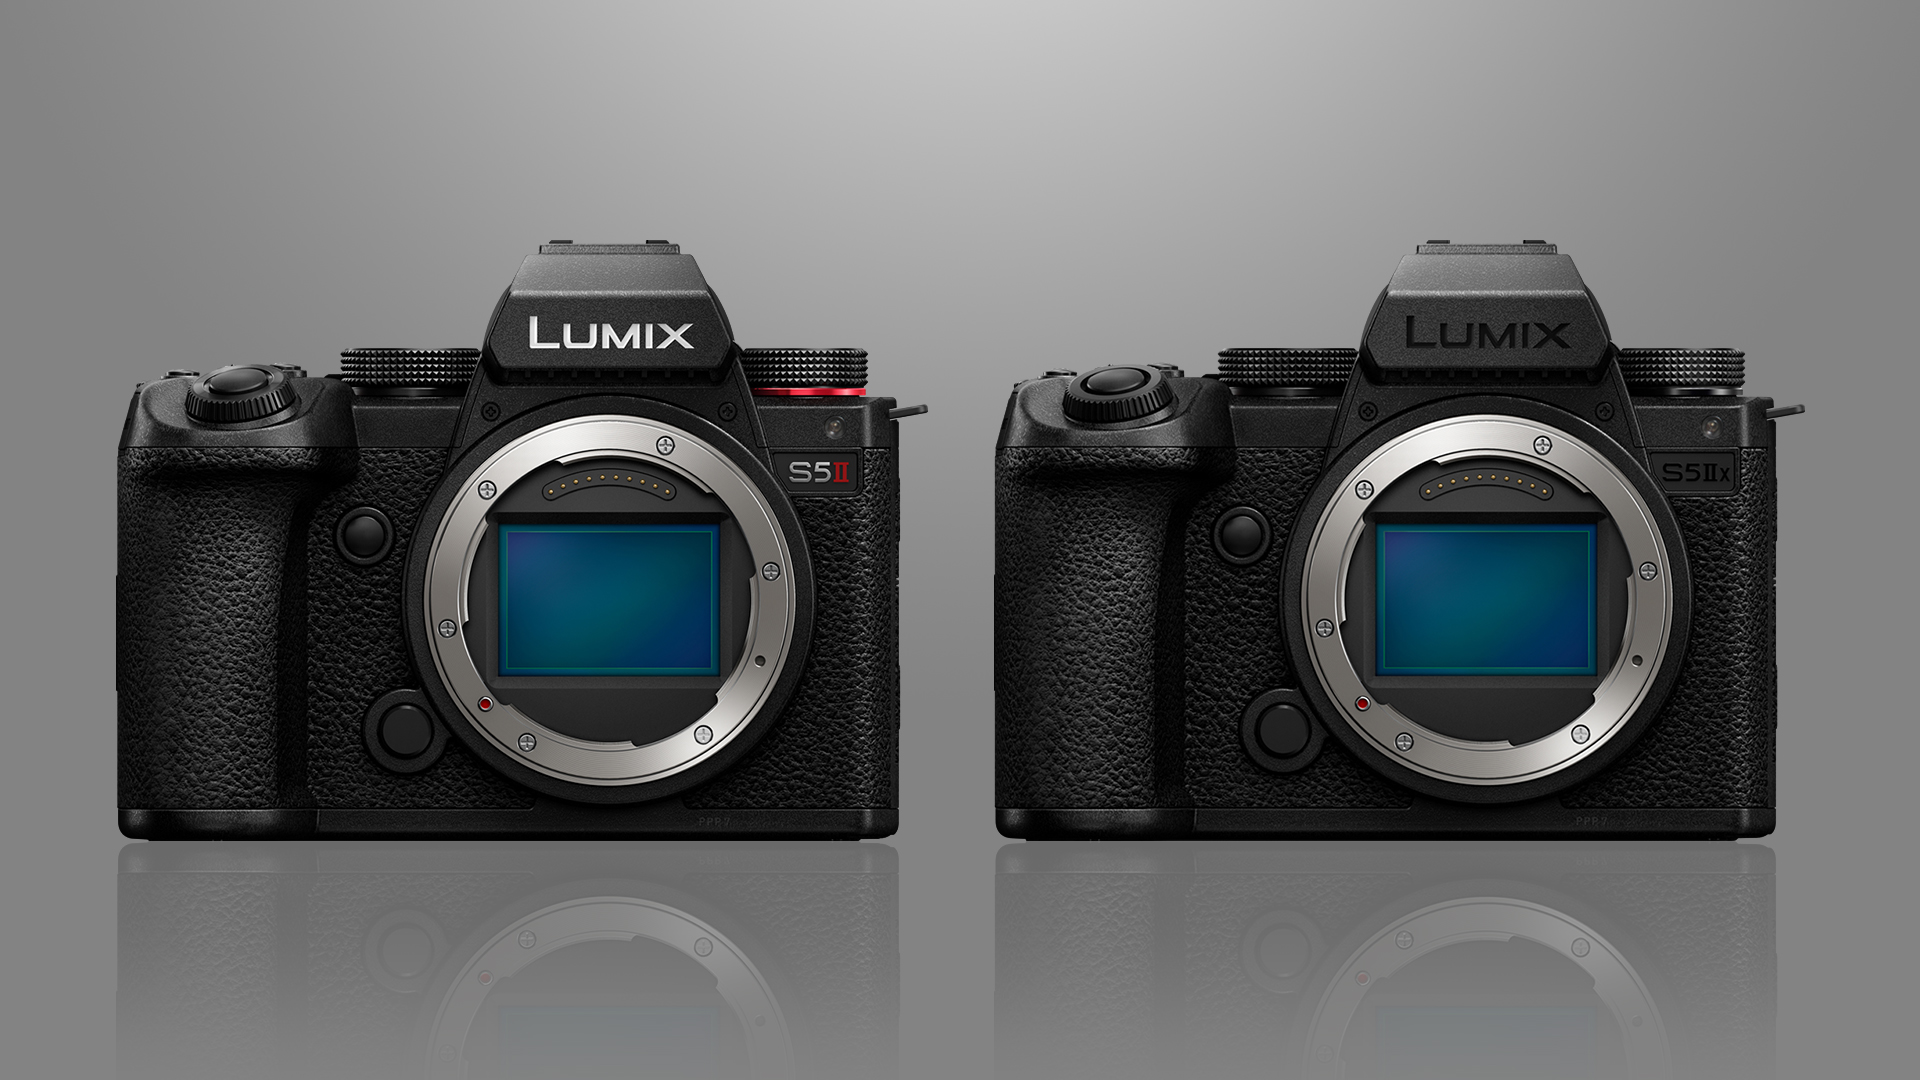 The Panasonic S5 is Officially Announced. What Are Your Thoughts?